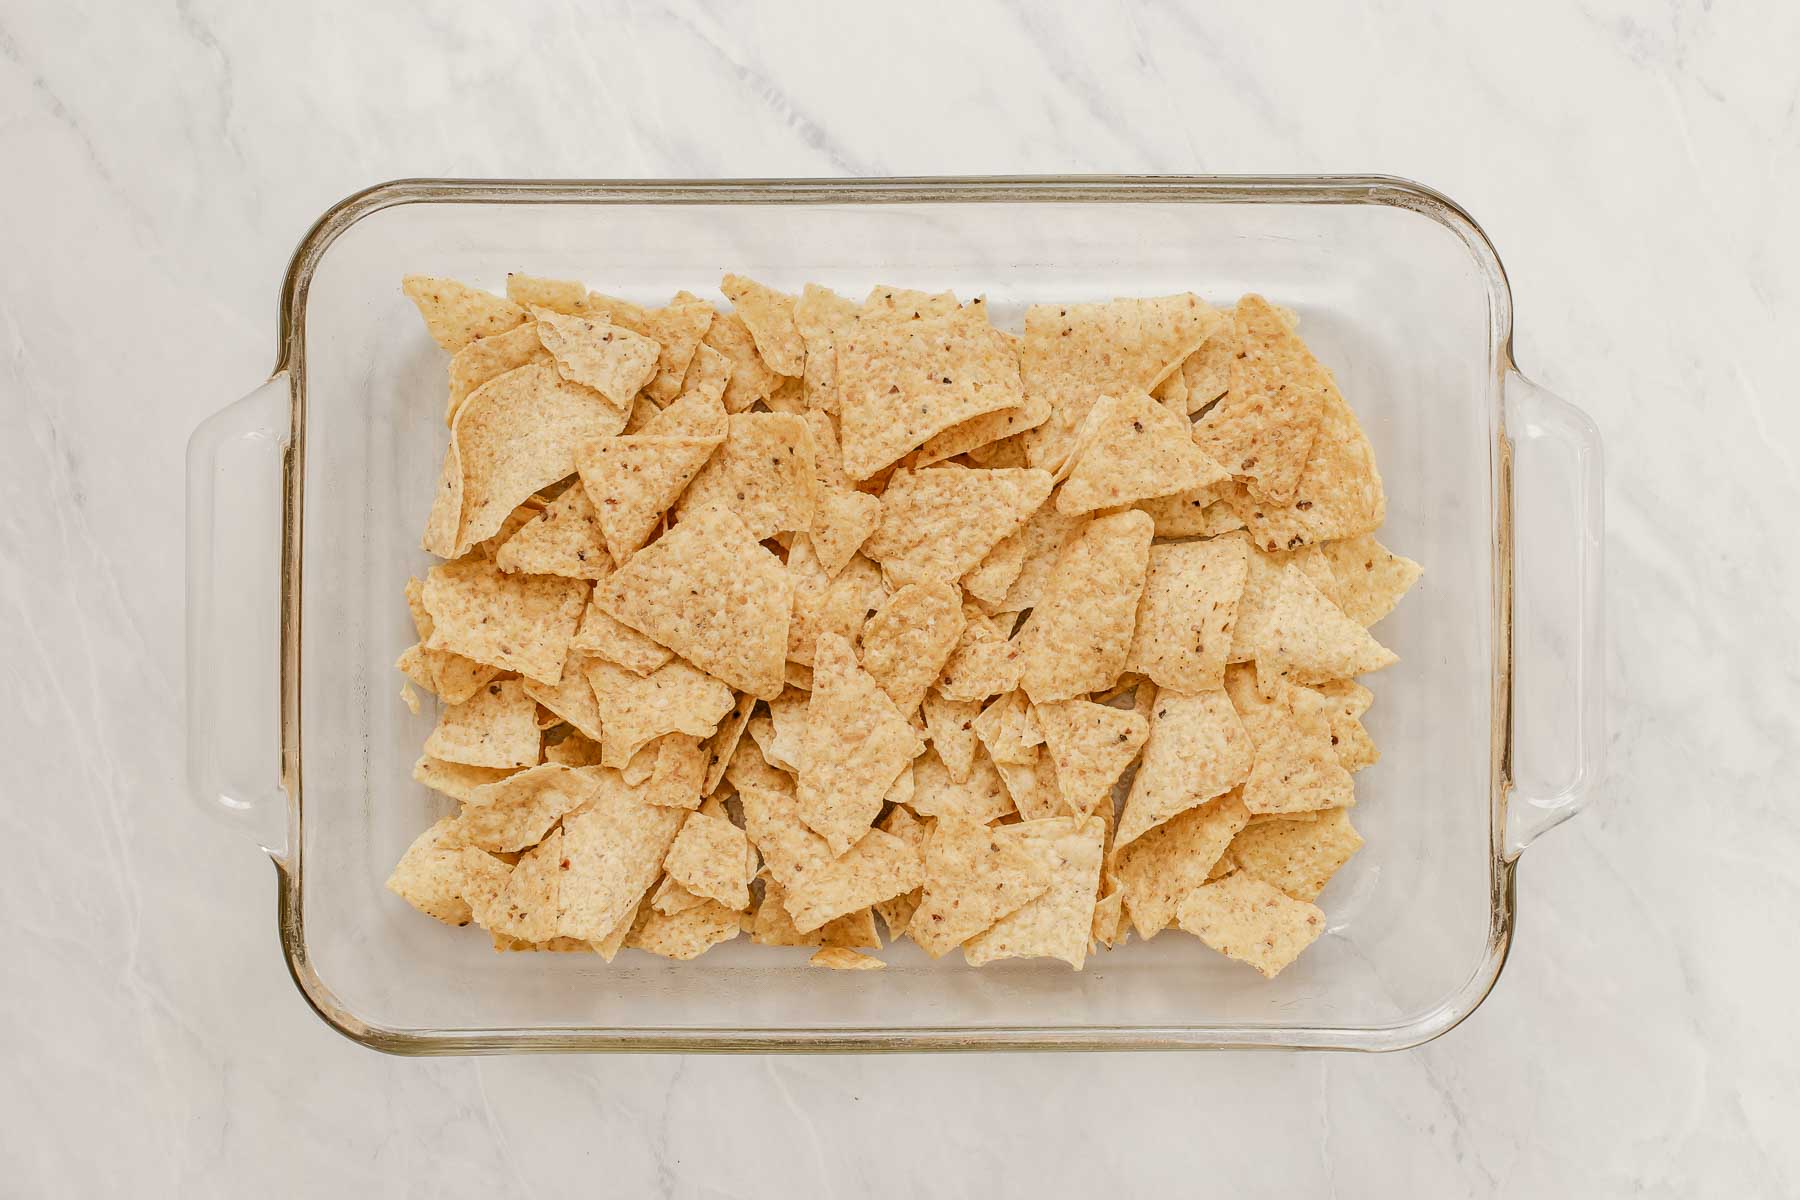 A 9x13 baking dish with crushed tortilla chips in the bottom.